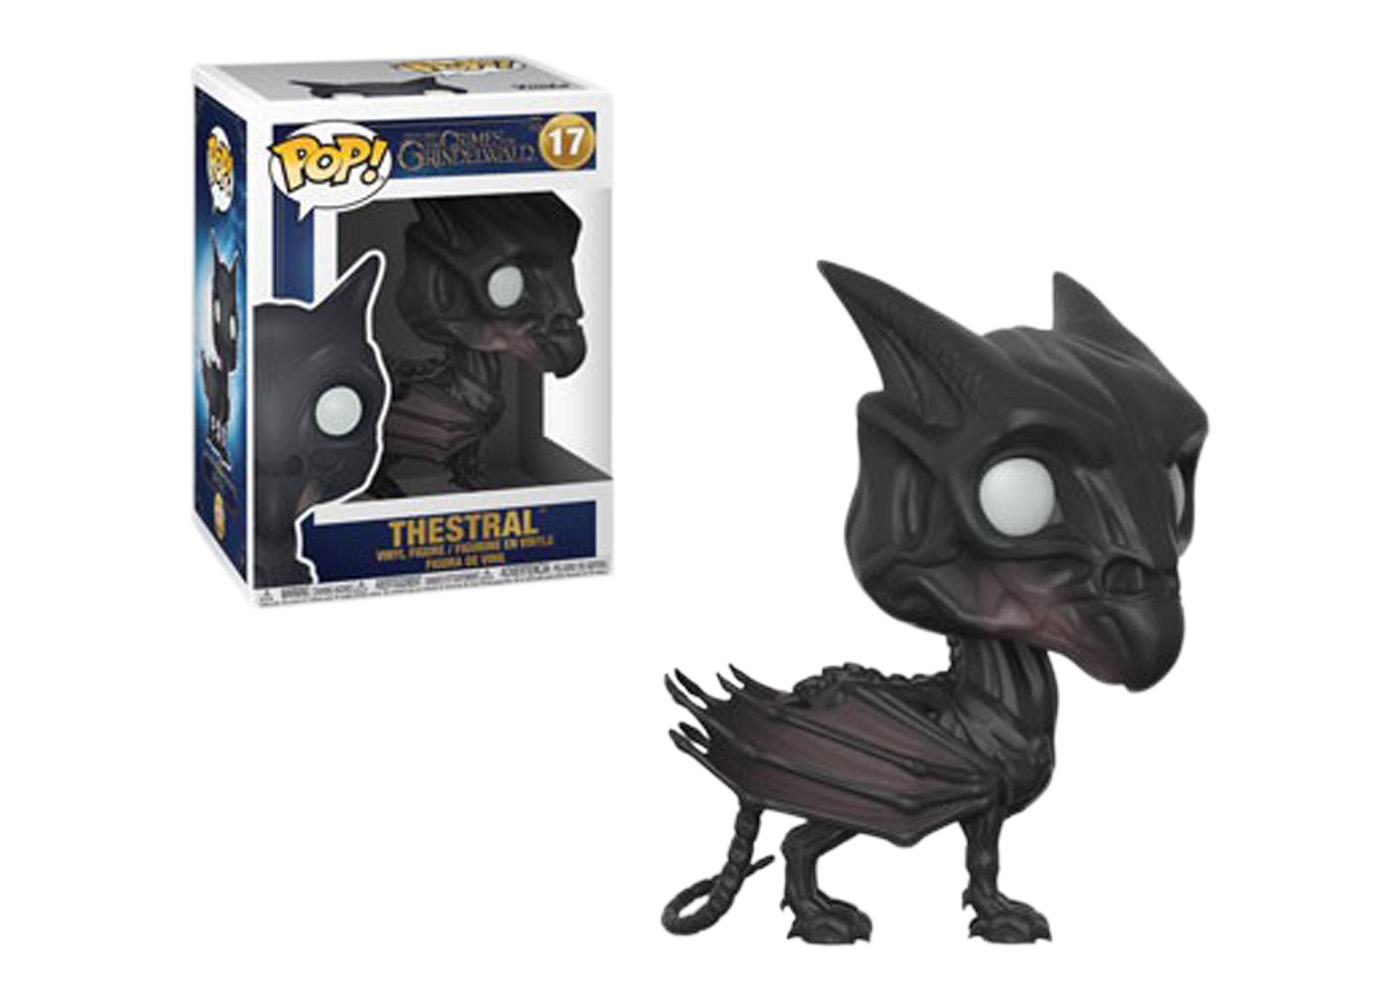 Funko Pop! Fantastic Beasts The Crimes of Grindelwald Thestral 